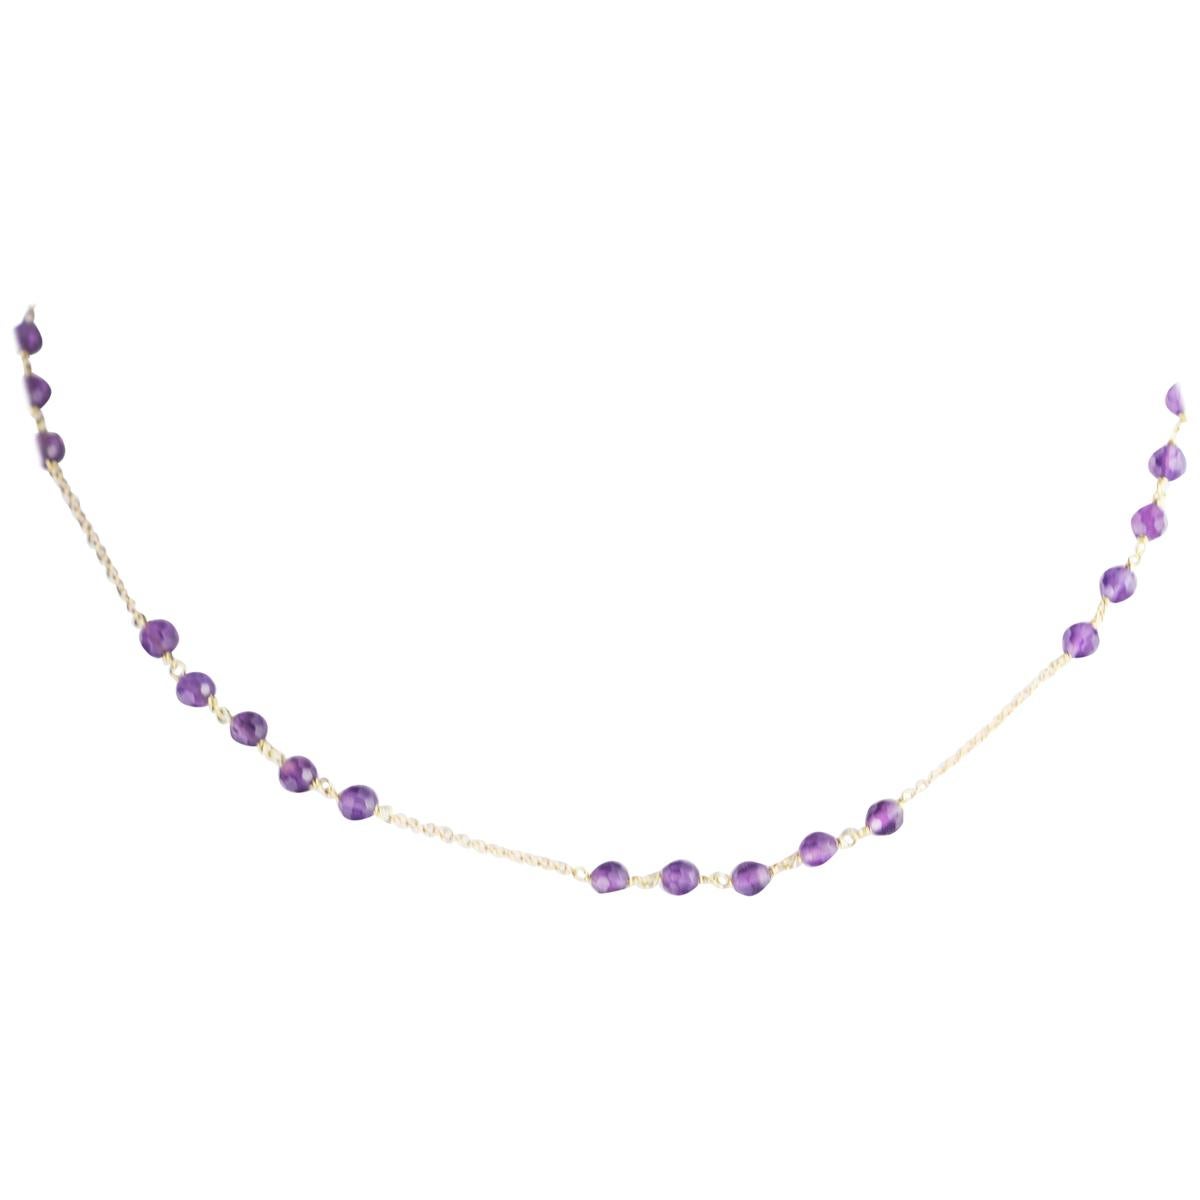 Amethyst Rondelles 9 Karat Yellow Gold Chain Handmade Cocktail Chic Necklace For Sale